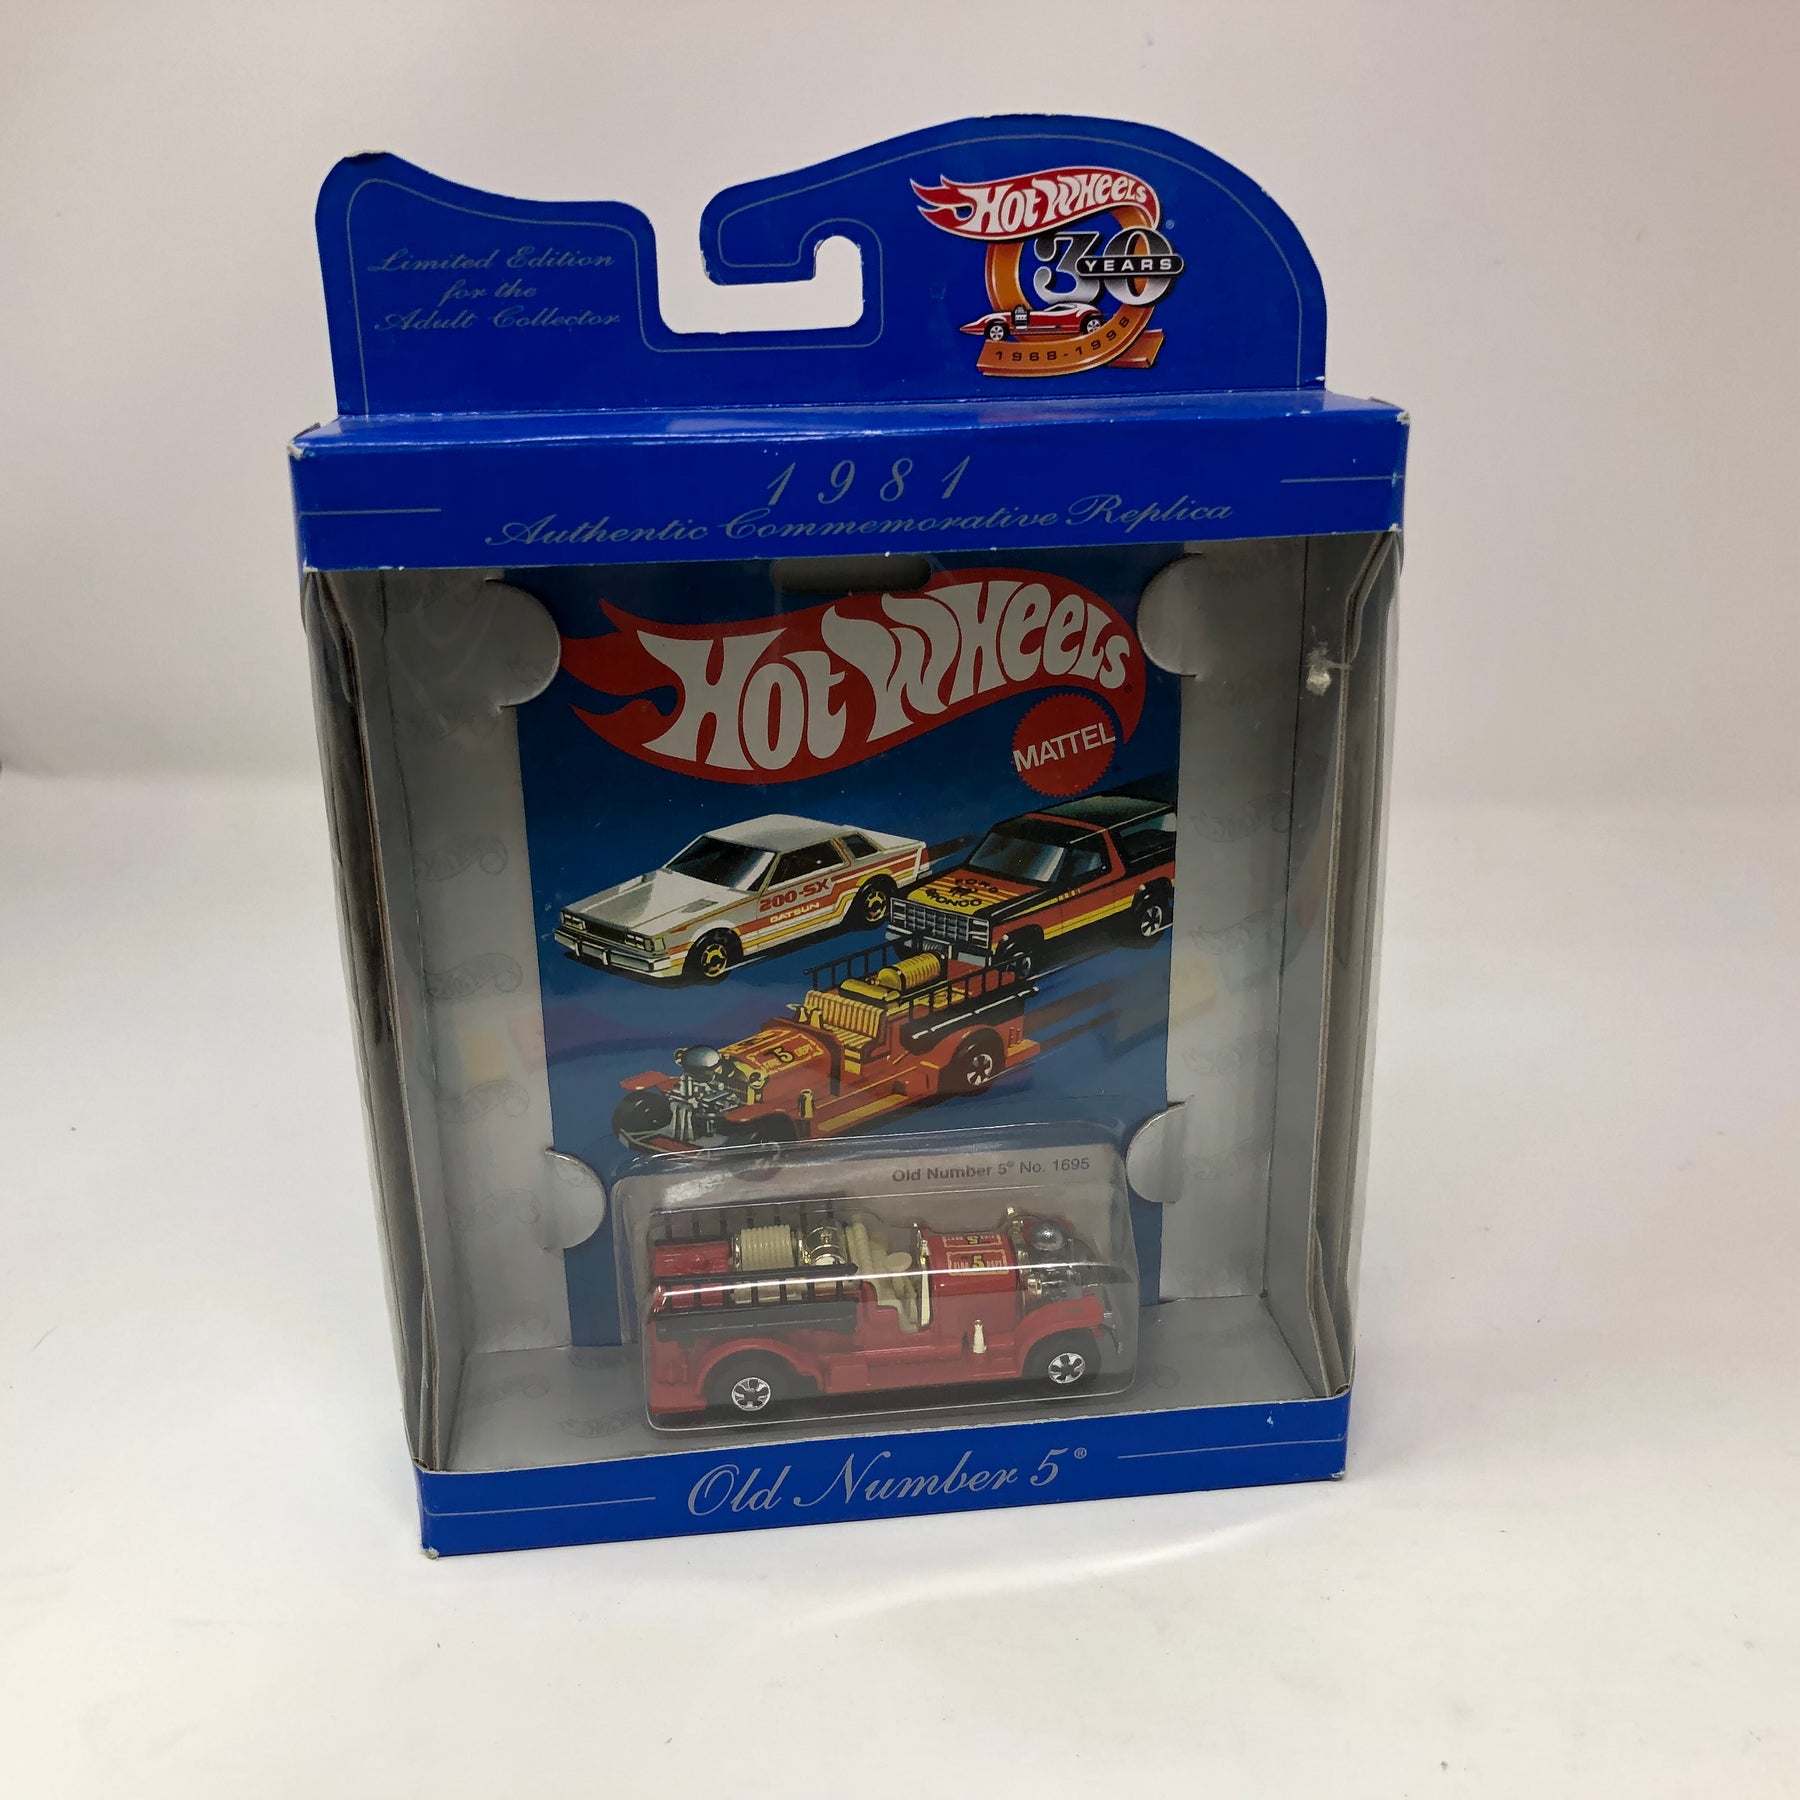 Old Number 5 Hot Wheels Commemorative Replica 30 Years Wheelcollectors 2048